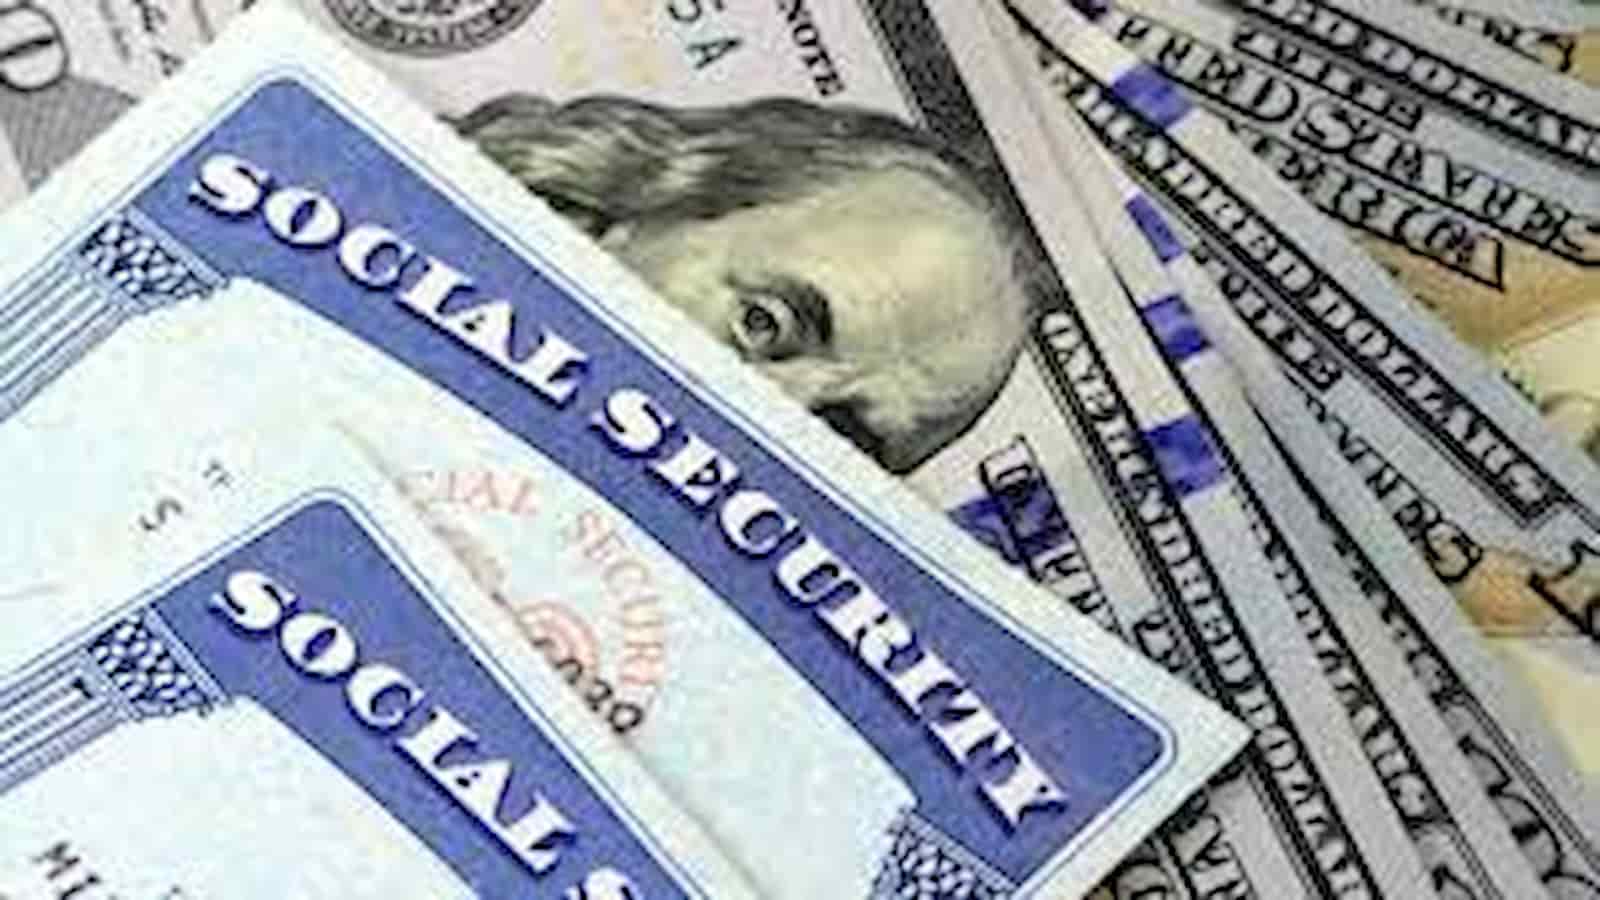 Social Security Recipients Receiving Payments This Week